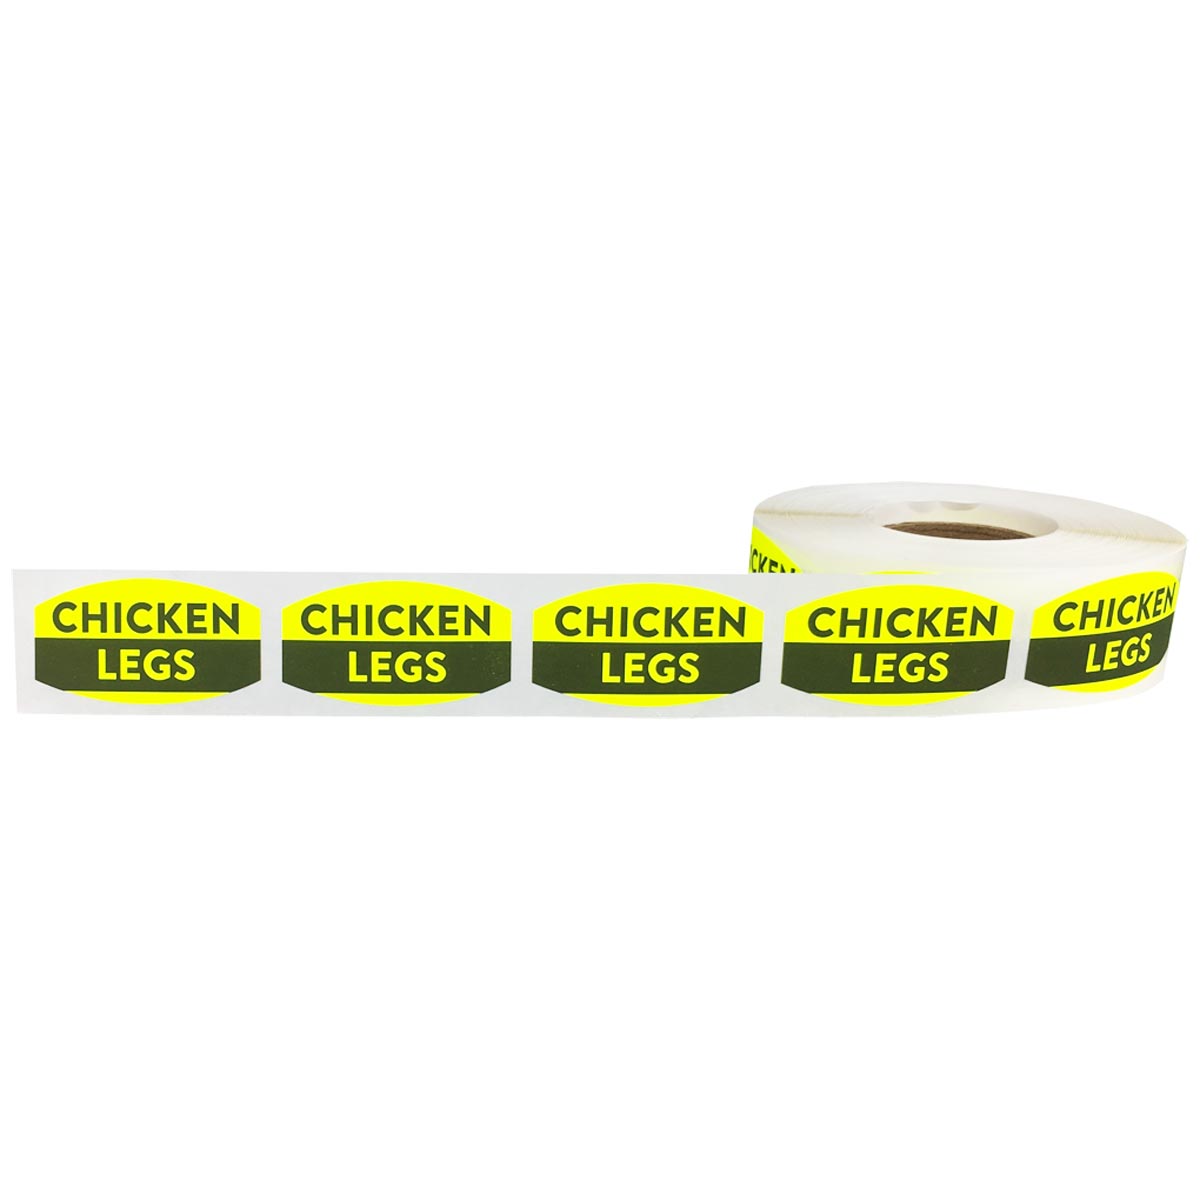 Chicken Legs Meat Grocery Stickers 0.75 x 1.375 Inches 500 Labels on a Roll 